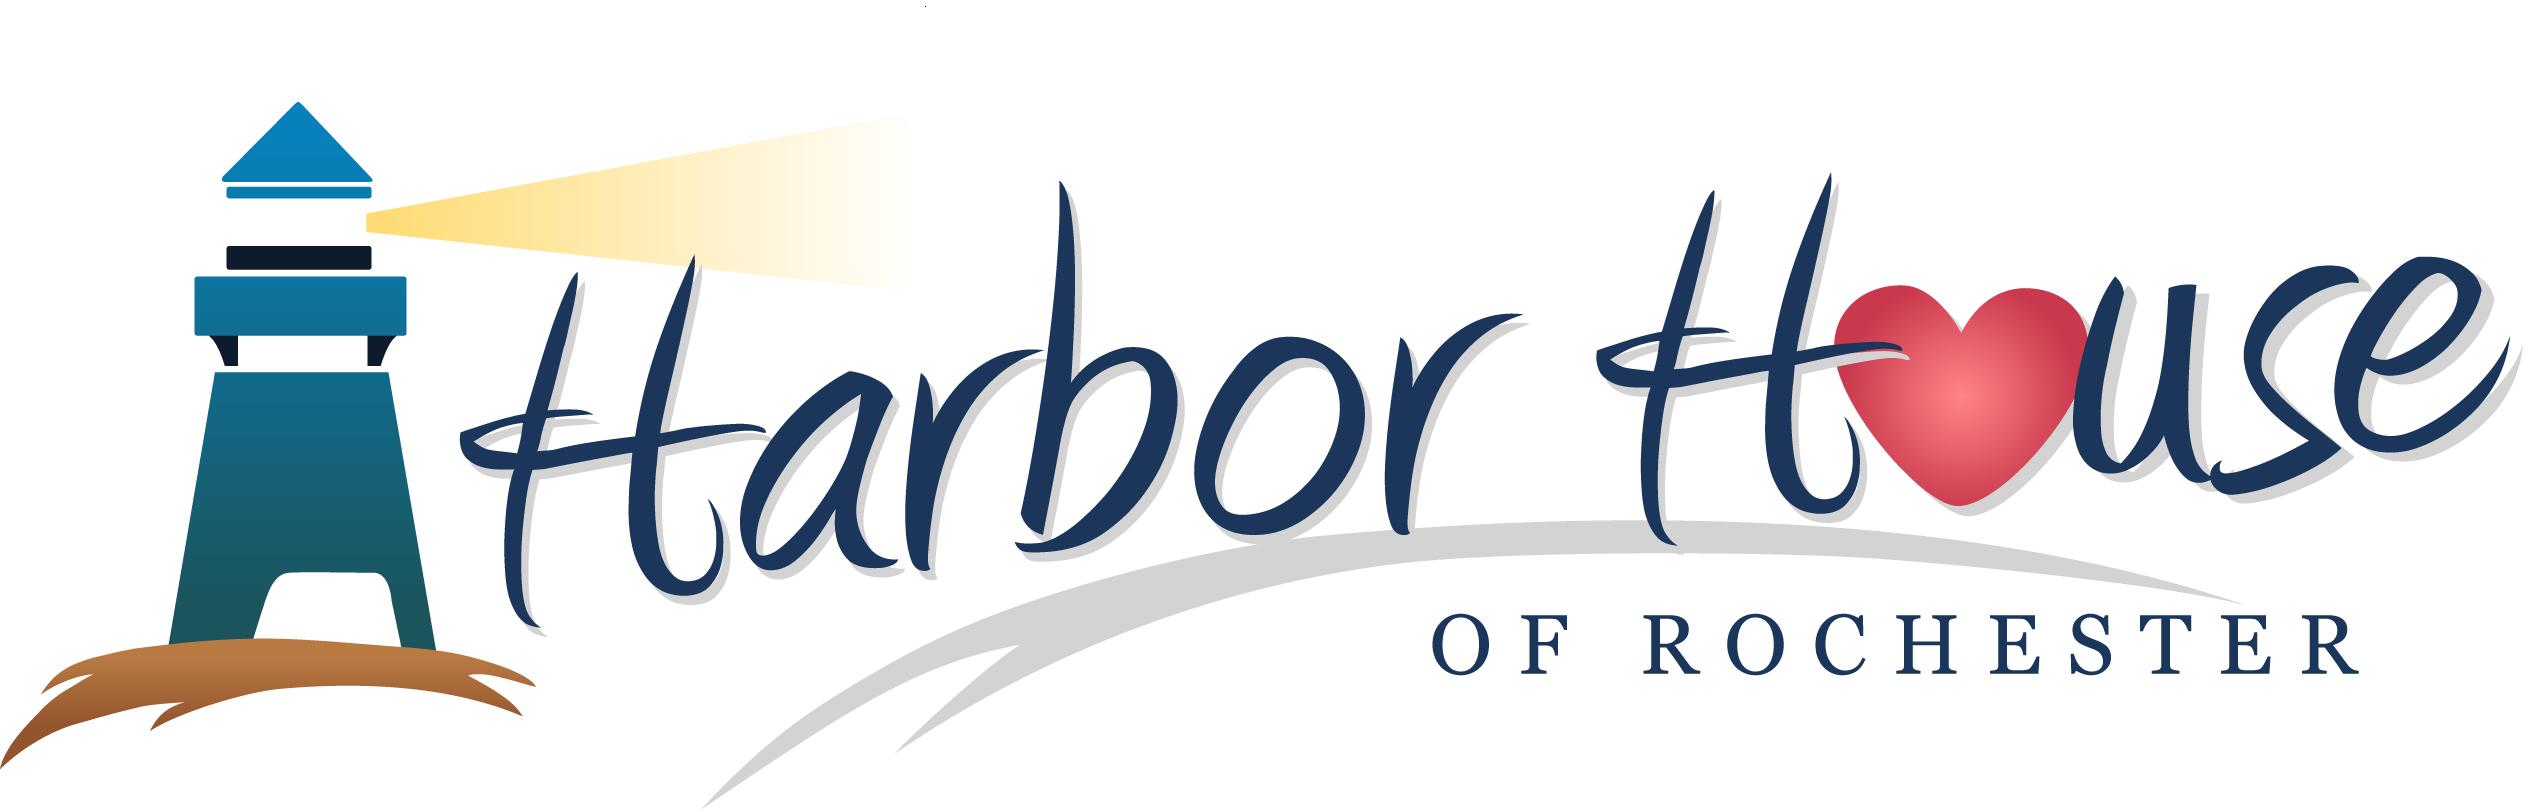 Harbor House of Rochester, Inc.